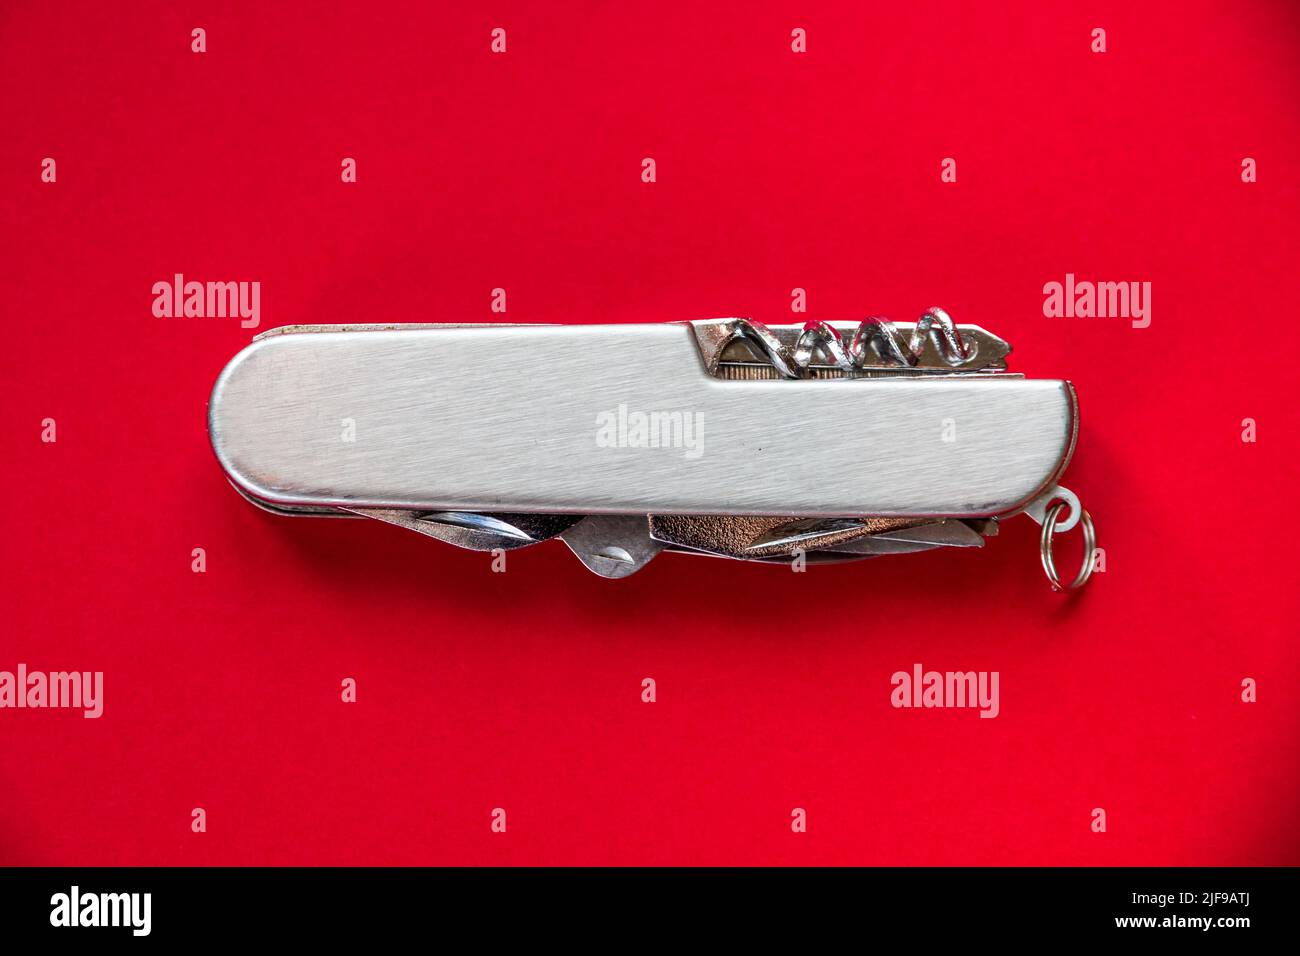 Metallic swiss knife isolated on red background Stock Photo